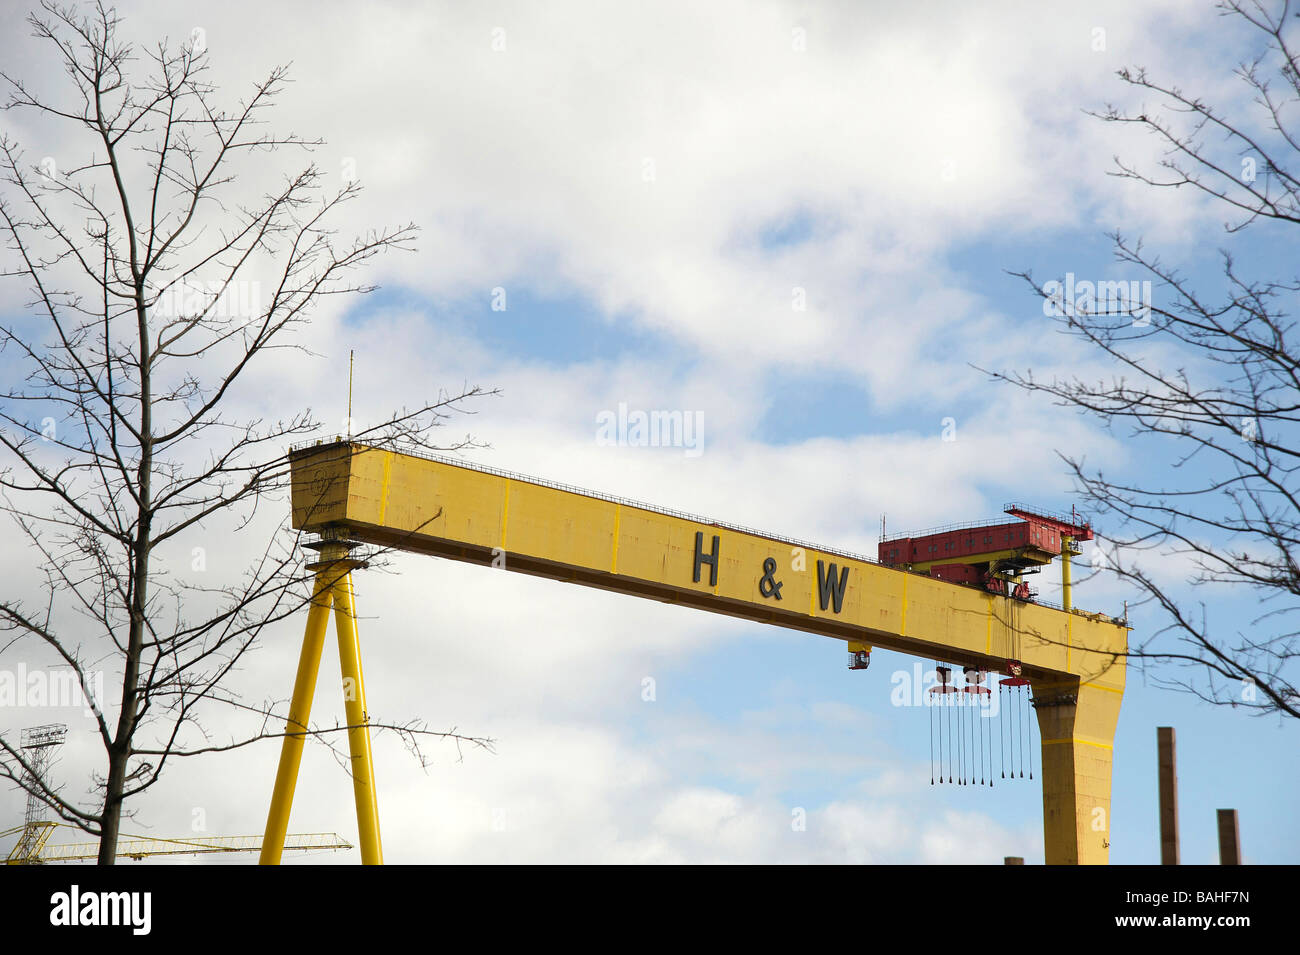 The disused cranes at Harland and Wolfe Shipyard, Belfast, Northern Ireland Stock Photo